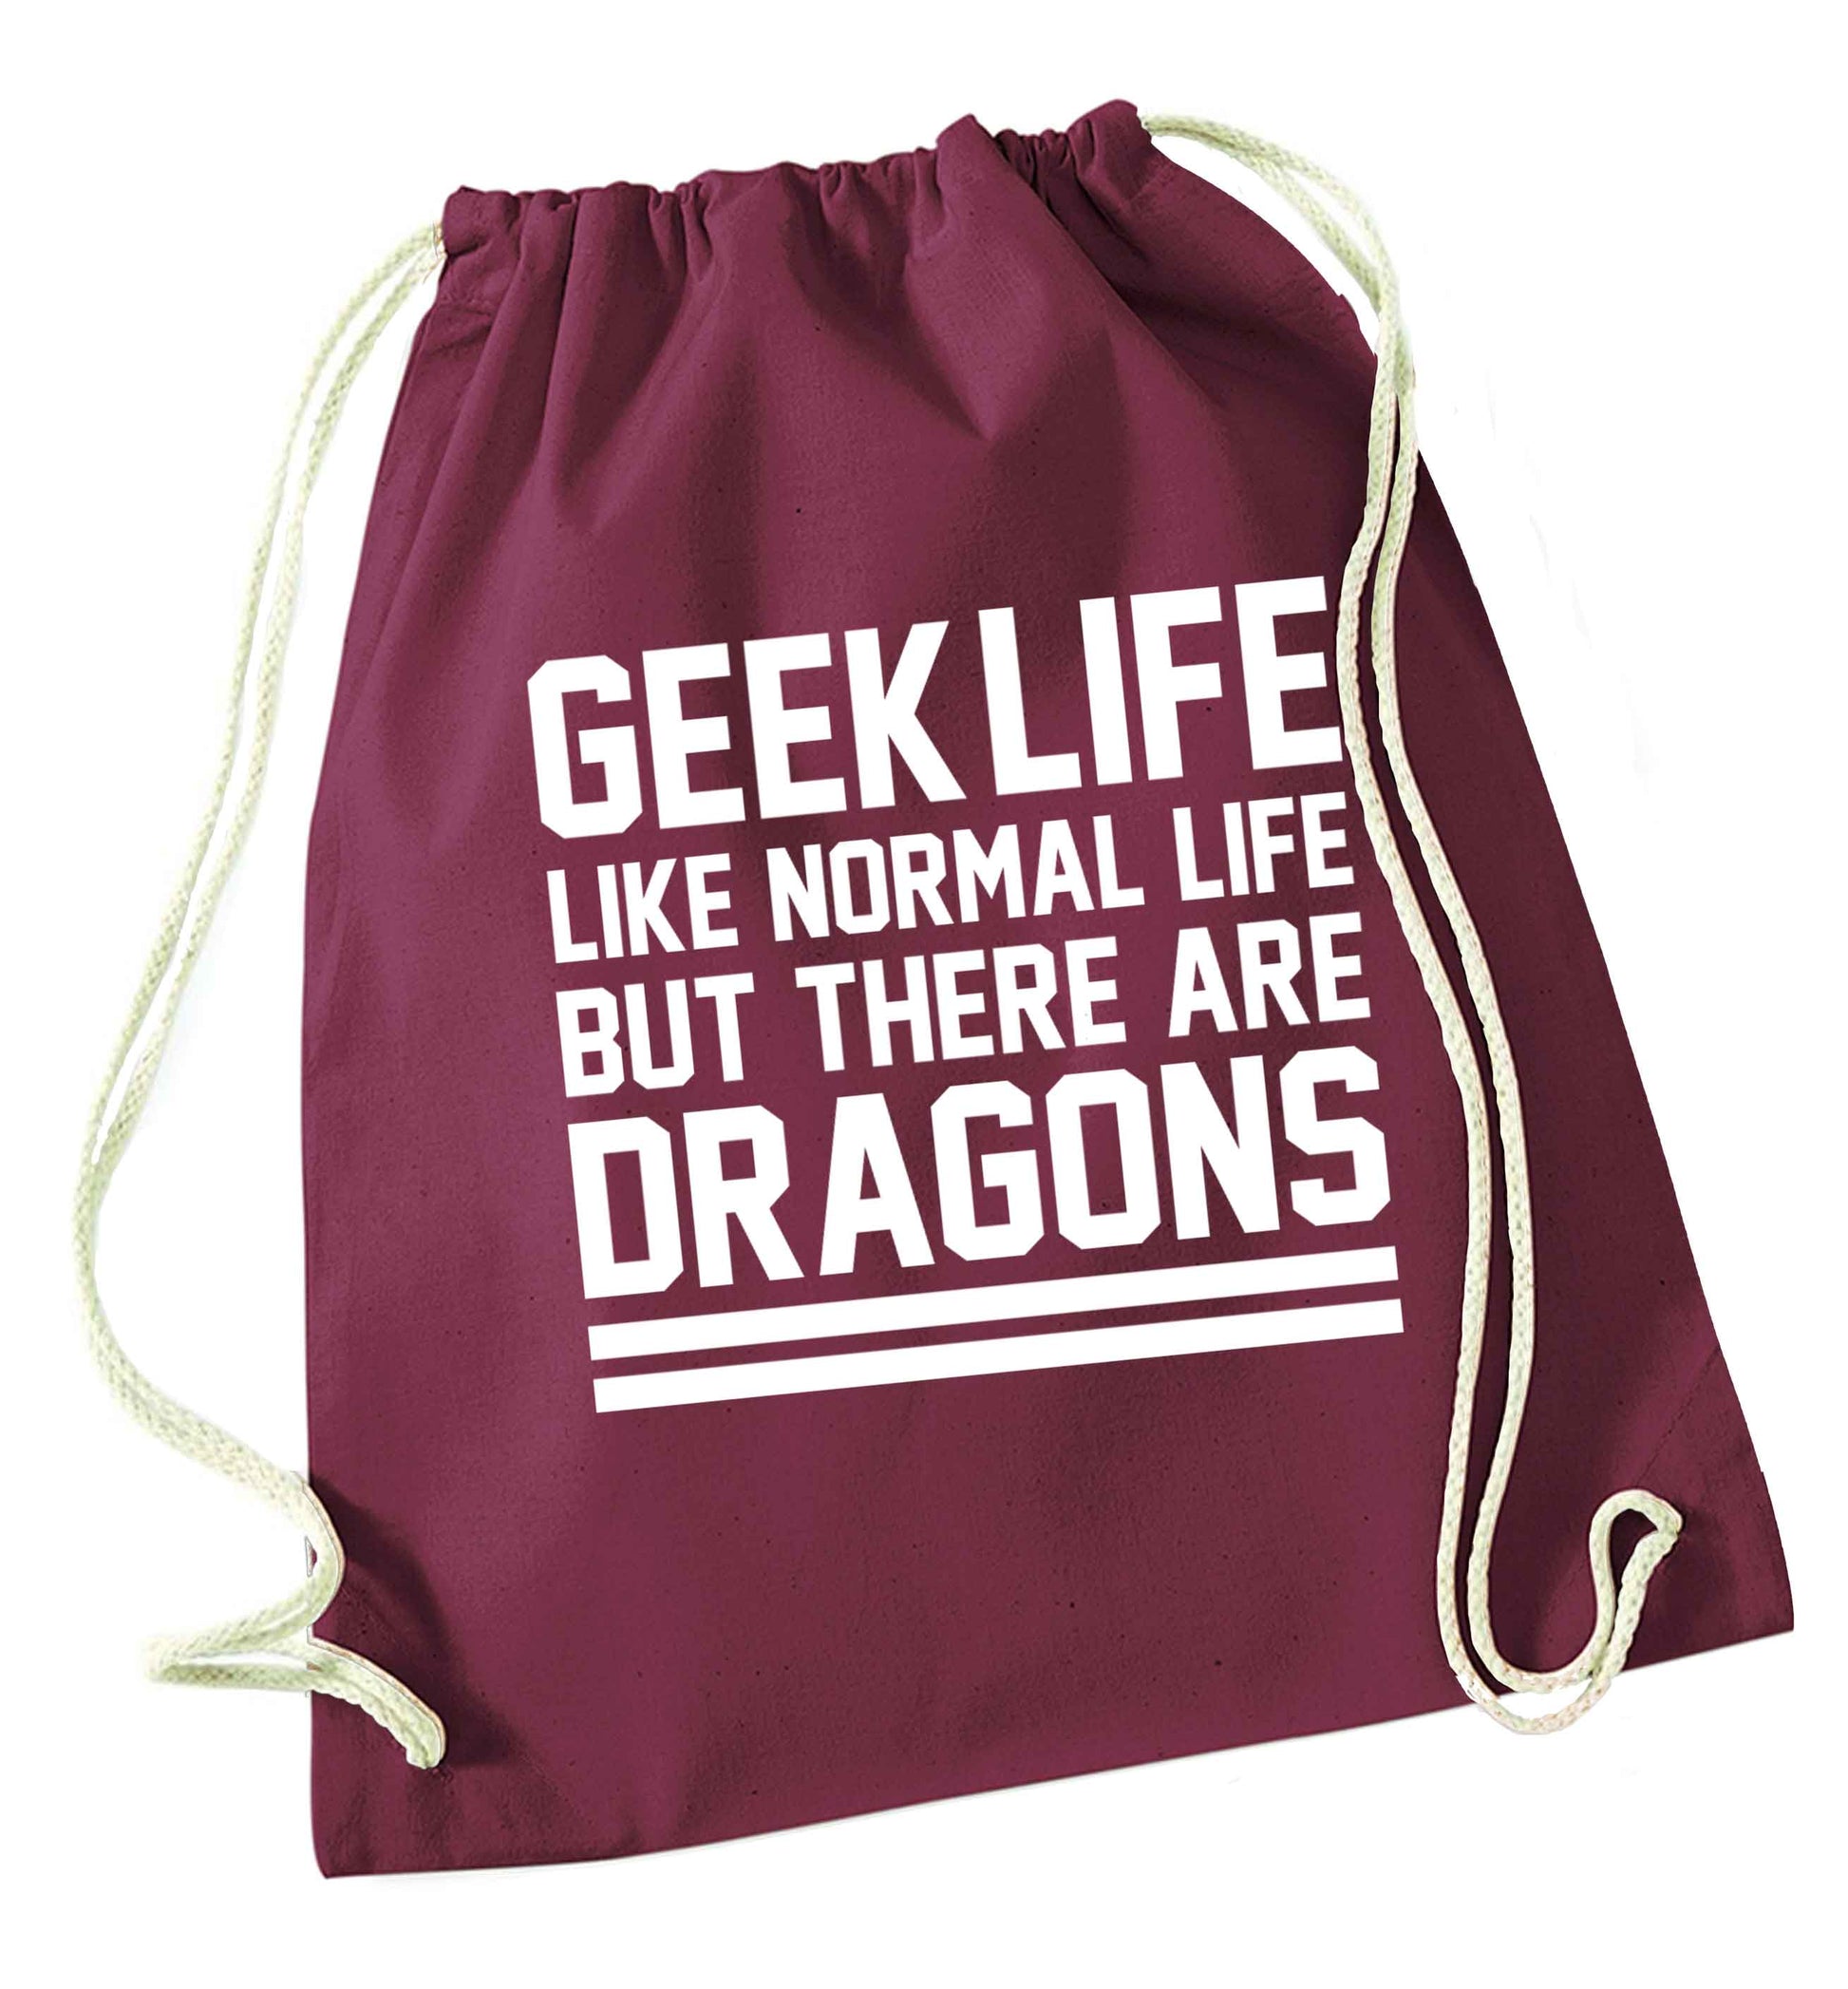 Geek life like normal life but there are dragons maroon drawstring bag